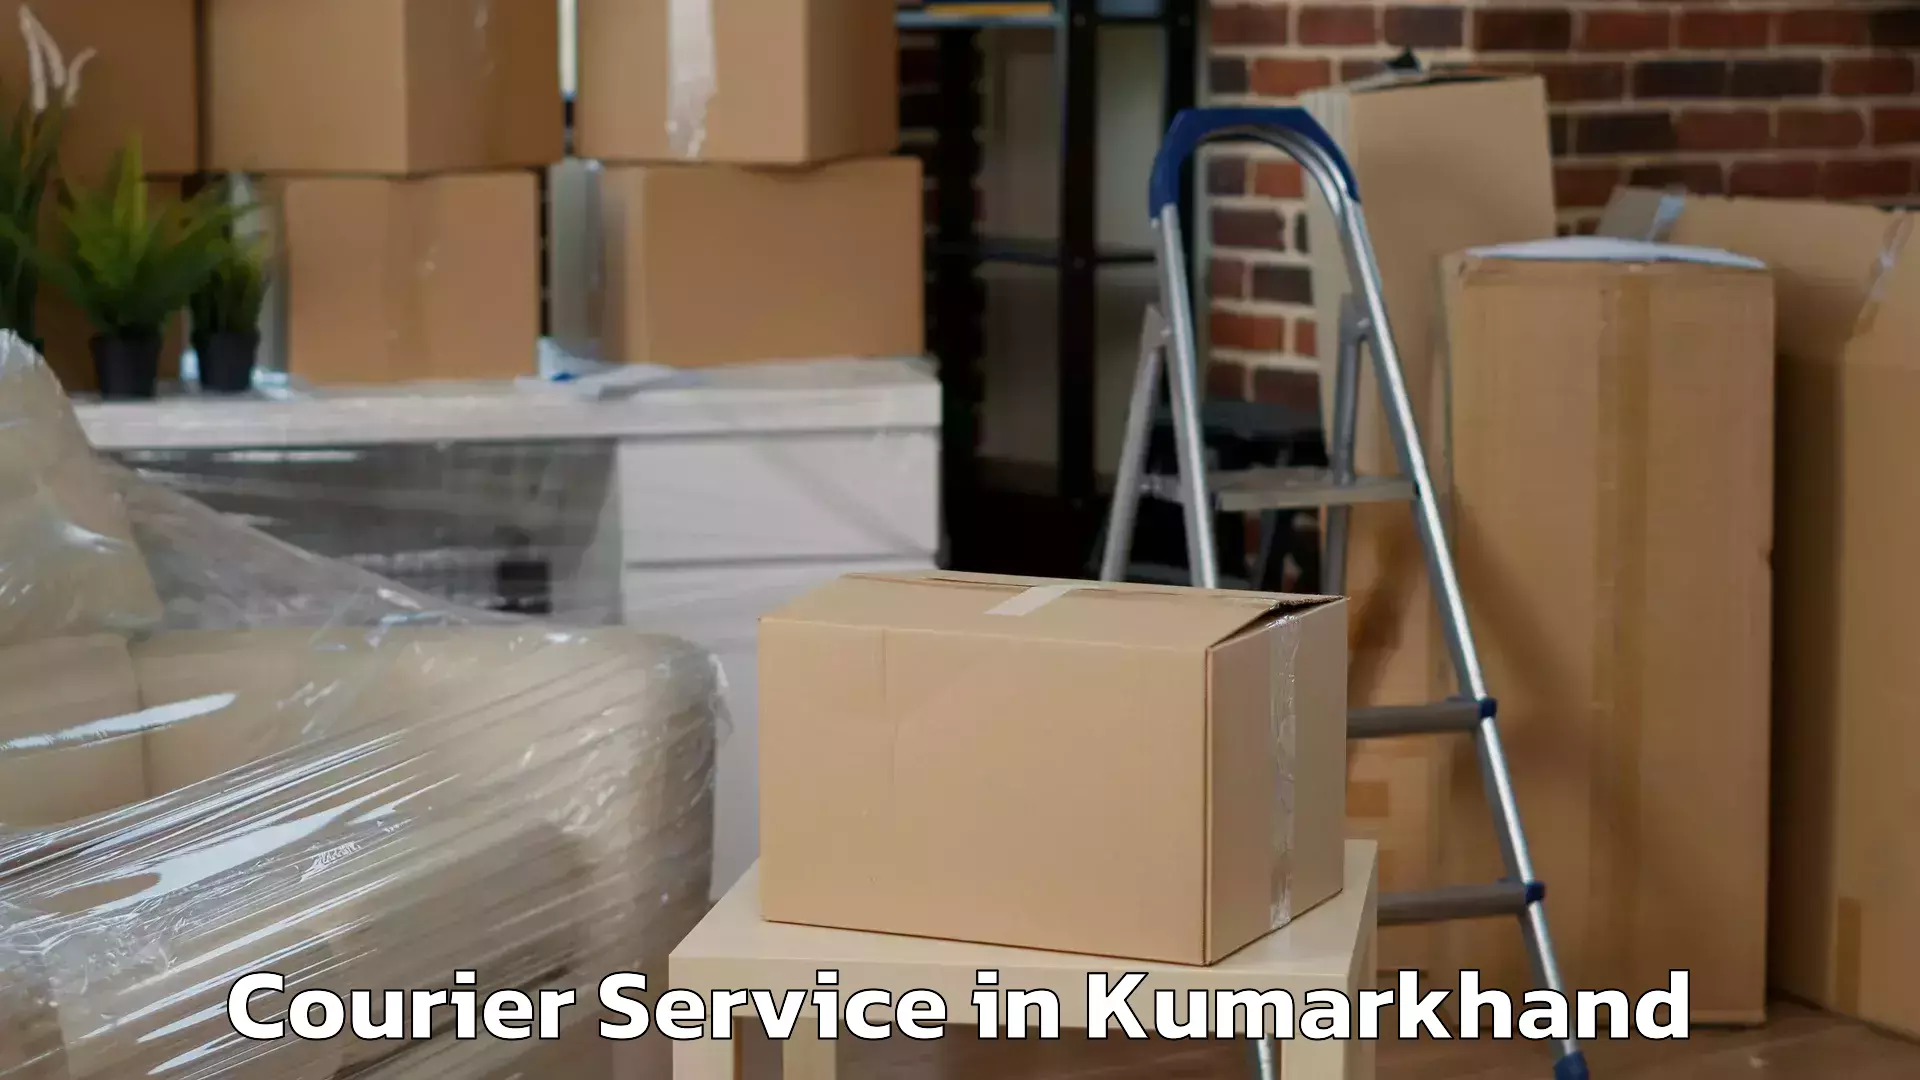 Advanced package delivery in Kumarkhand